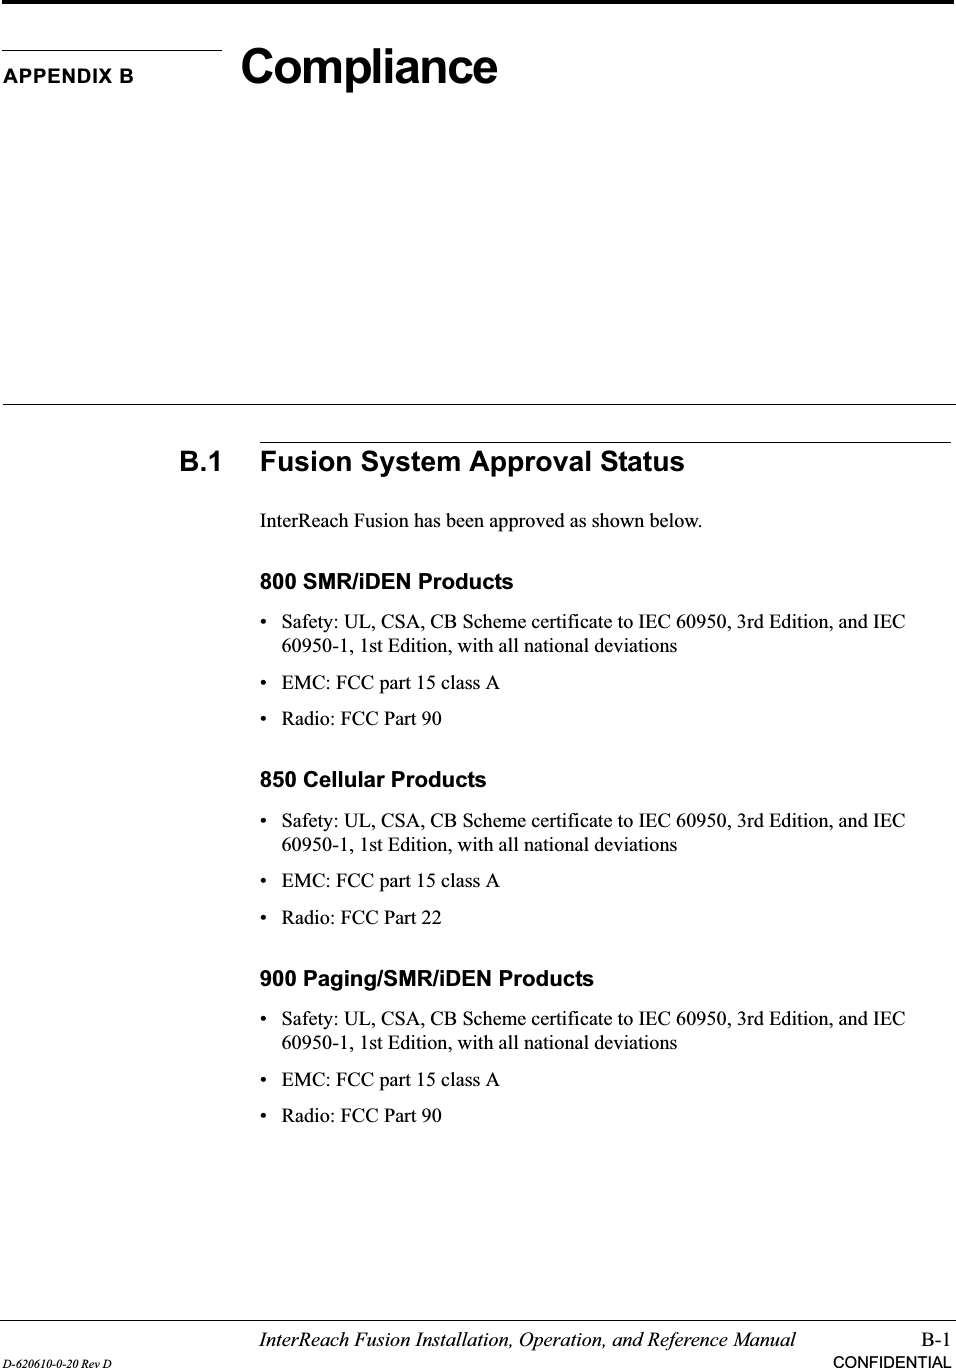 InterReach Fusion Installation, Operation, and Reference Manual B-1D-620610-0-20 Rev D CONFIDENTIALAPPENDIX B ComplianceB.1 Fusion System Approval StatusInterReach Fusion has been approved as shown below.800 SMR/iDEN Products• Safety: UL, CSA, CB Scheme certificate to IEC 60950, 3rd Edition, and IEC 60950-1, 1st Edition, with all national deviations• EMC: FCC part 15 class A• Radio: FCC Part 90850 Cellular Products• Safety: UL, CSA, CB Scheme certificate to IEC 60950, 3rd Edition, and IEC 60950-1, 1st Edition, with all national deviations• EMC: FCC part 15 class A• Radio: FCC Part 22900 Paging/SMR/iDEN Products• Safety: UL, CSA, CB Scheme certificate to IEC 60950, 3rd Edition, and IEC 60950-1, 1st Edition, with all national deviations• EMC: FCC part 15 class A• Radio: FCC Part 90